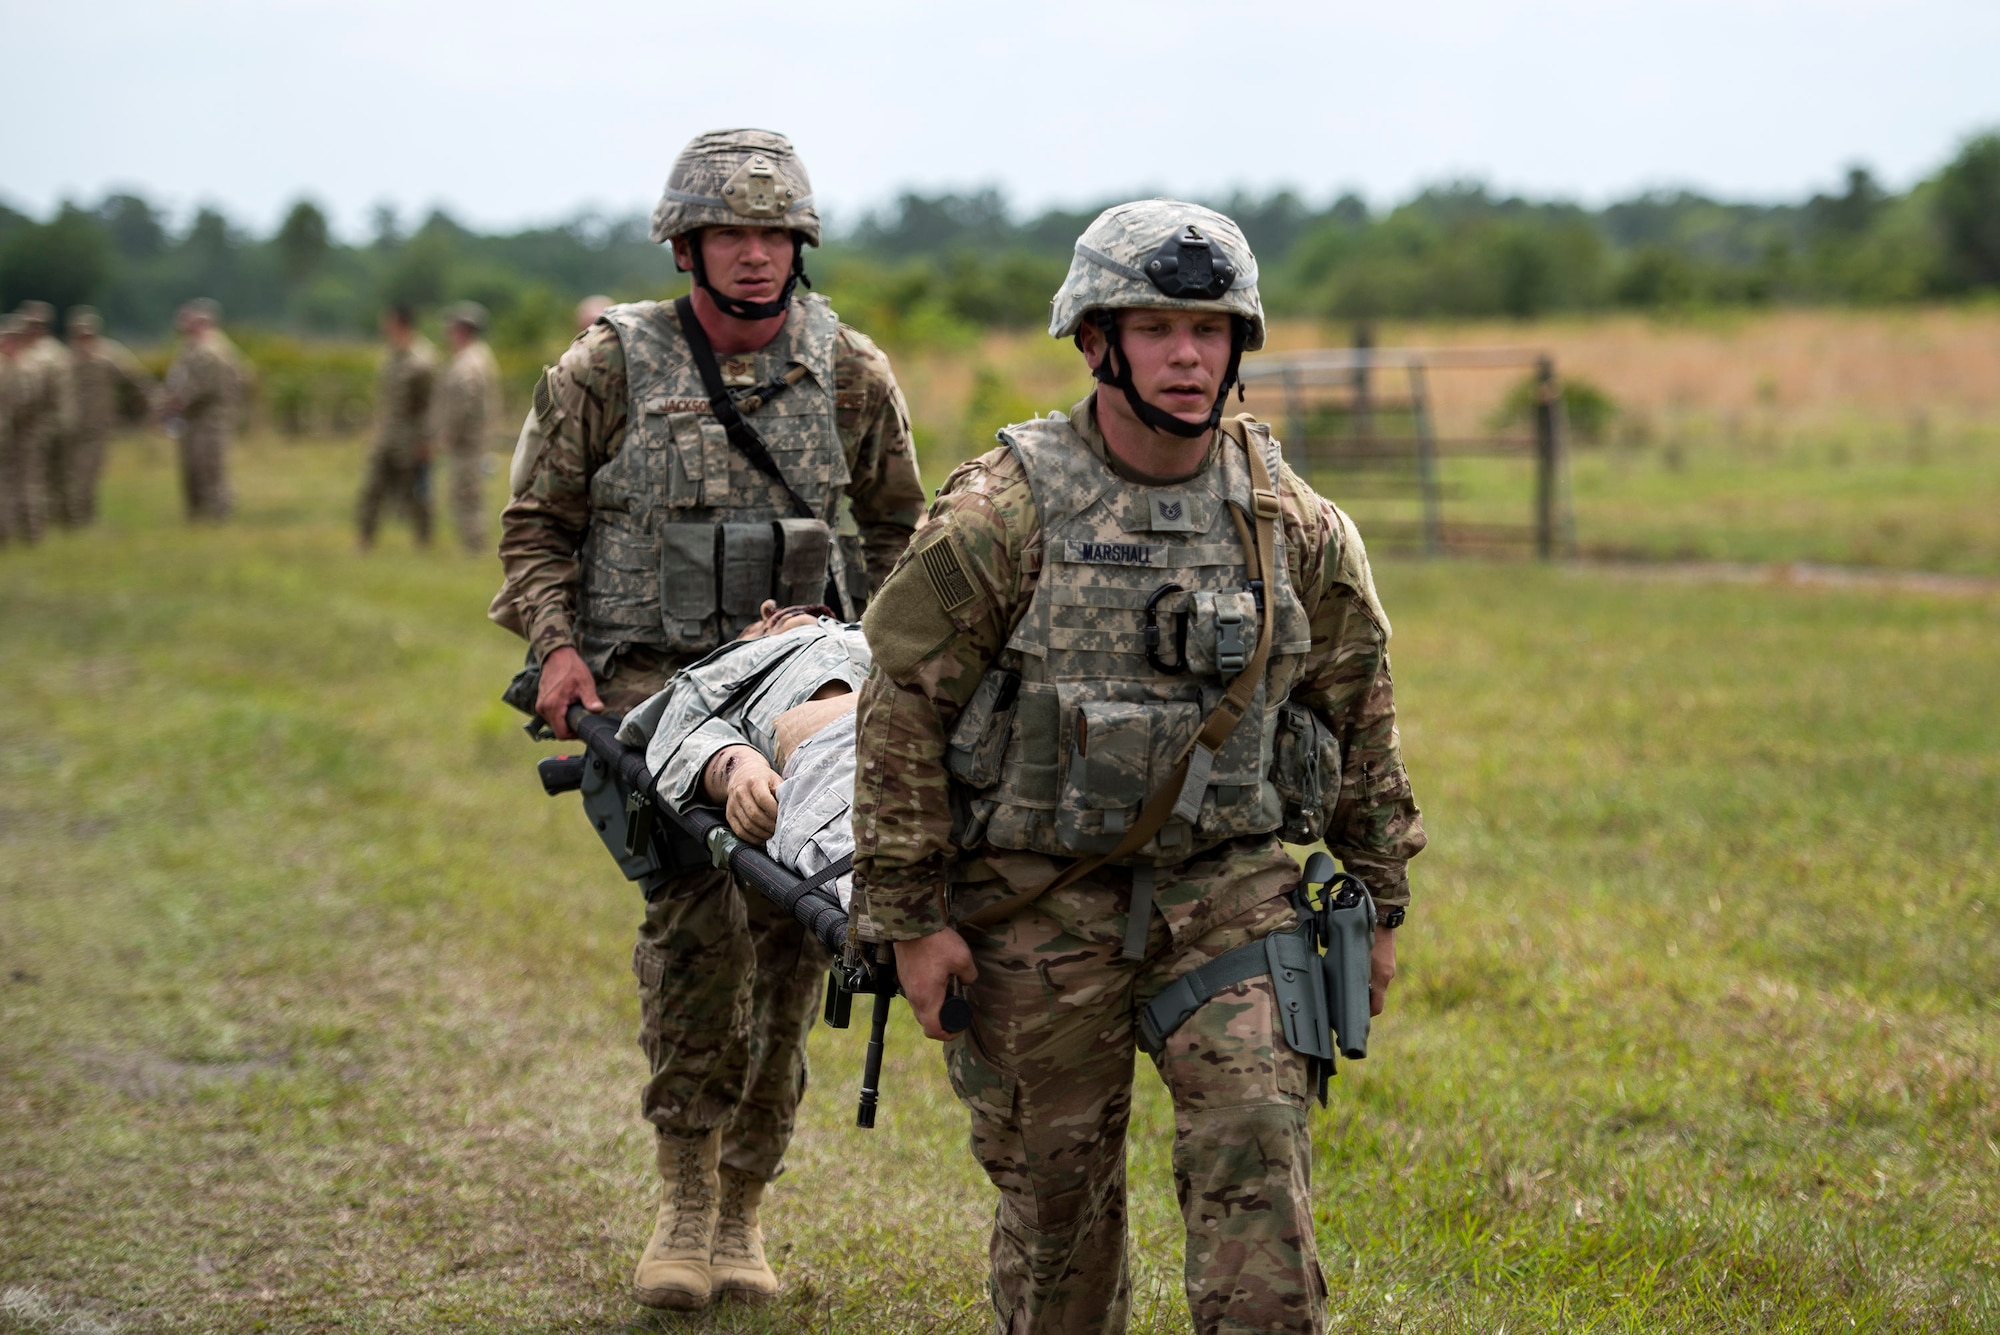 U.S. Air Force Tech Sgt. Brian Marshall, 823d Base Defense Squadron NCO in charge of training, and Staff Sgt. James Jackson, 823d BDS support NCO in charge, carry a dummy that weighed nearly 200 pounds, April 13, 2016, at Avon Park Air Force Range, Fla. This task was part of an obstacle course that also included disassembly and reassembly of a rifle and dressing in full mission oriented protective posture gear. (U.S. Air Force photo by Airman 1st Class Janiqua P. Robinson/Released)